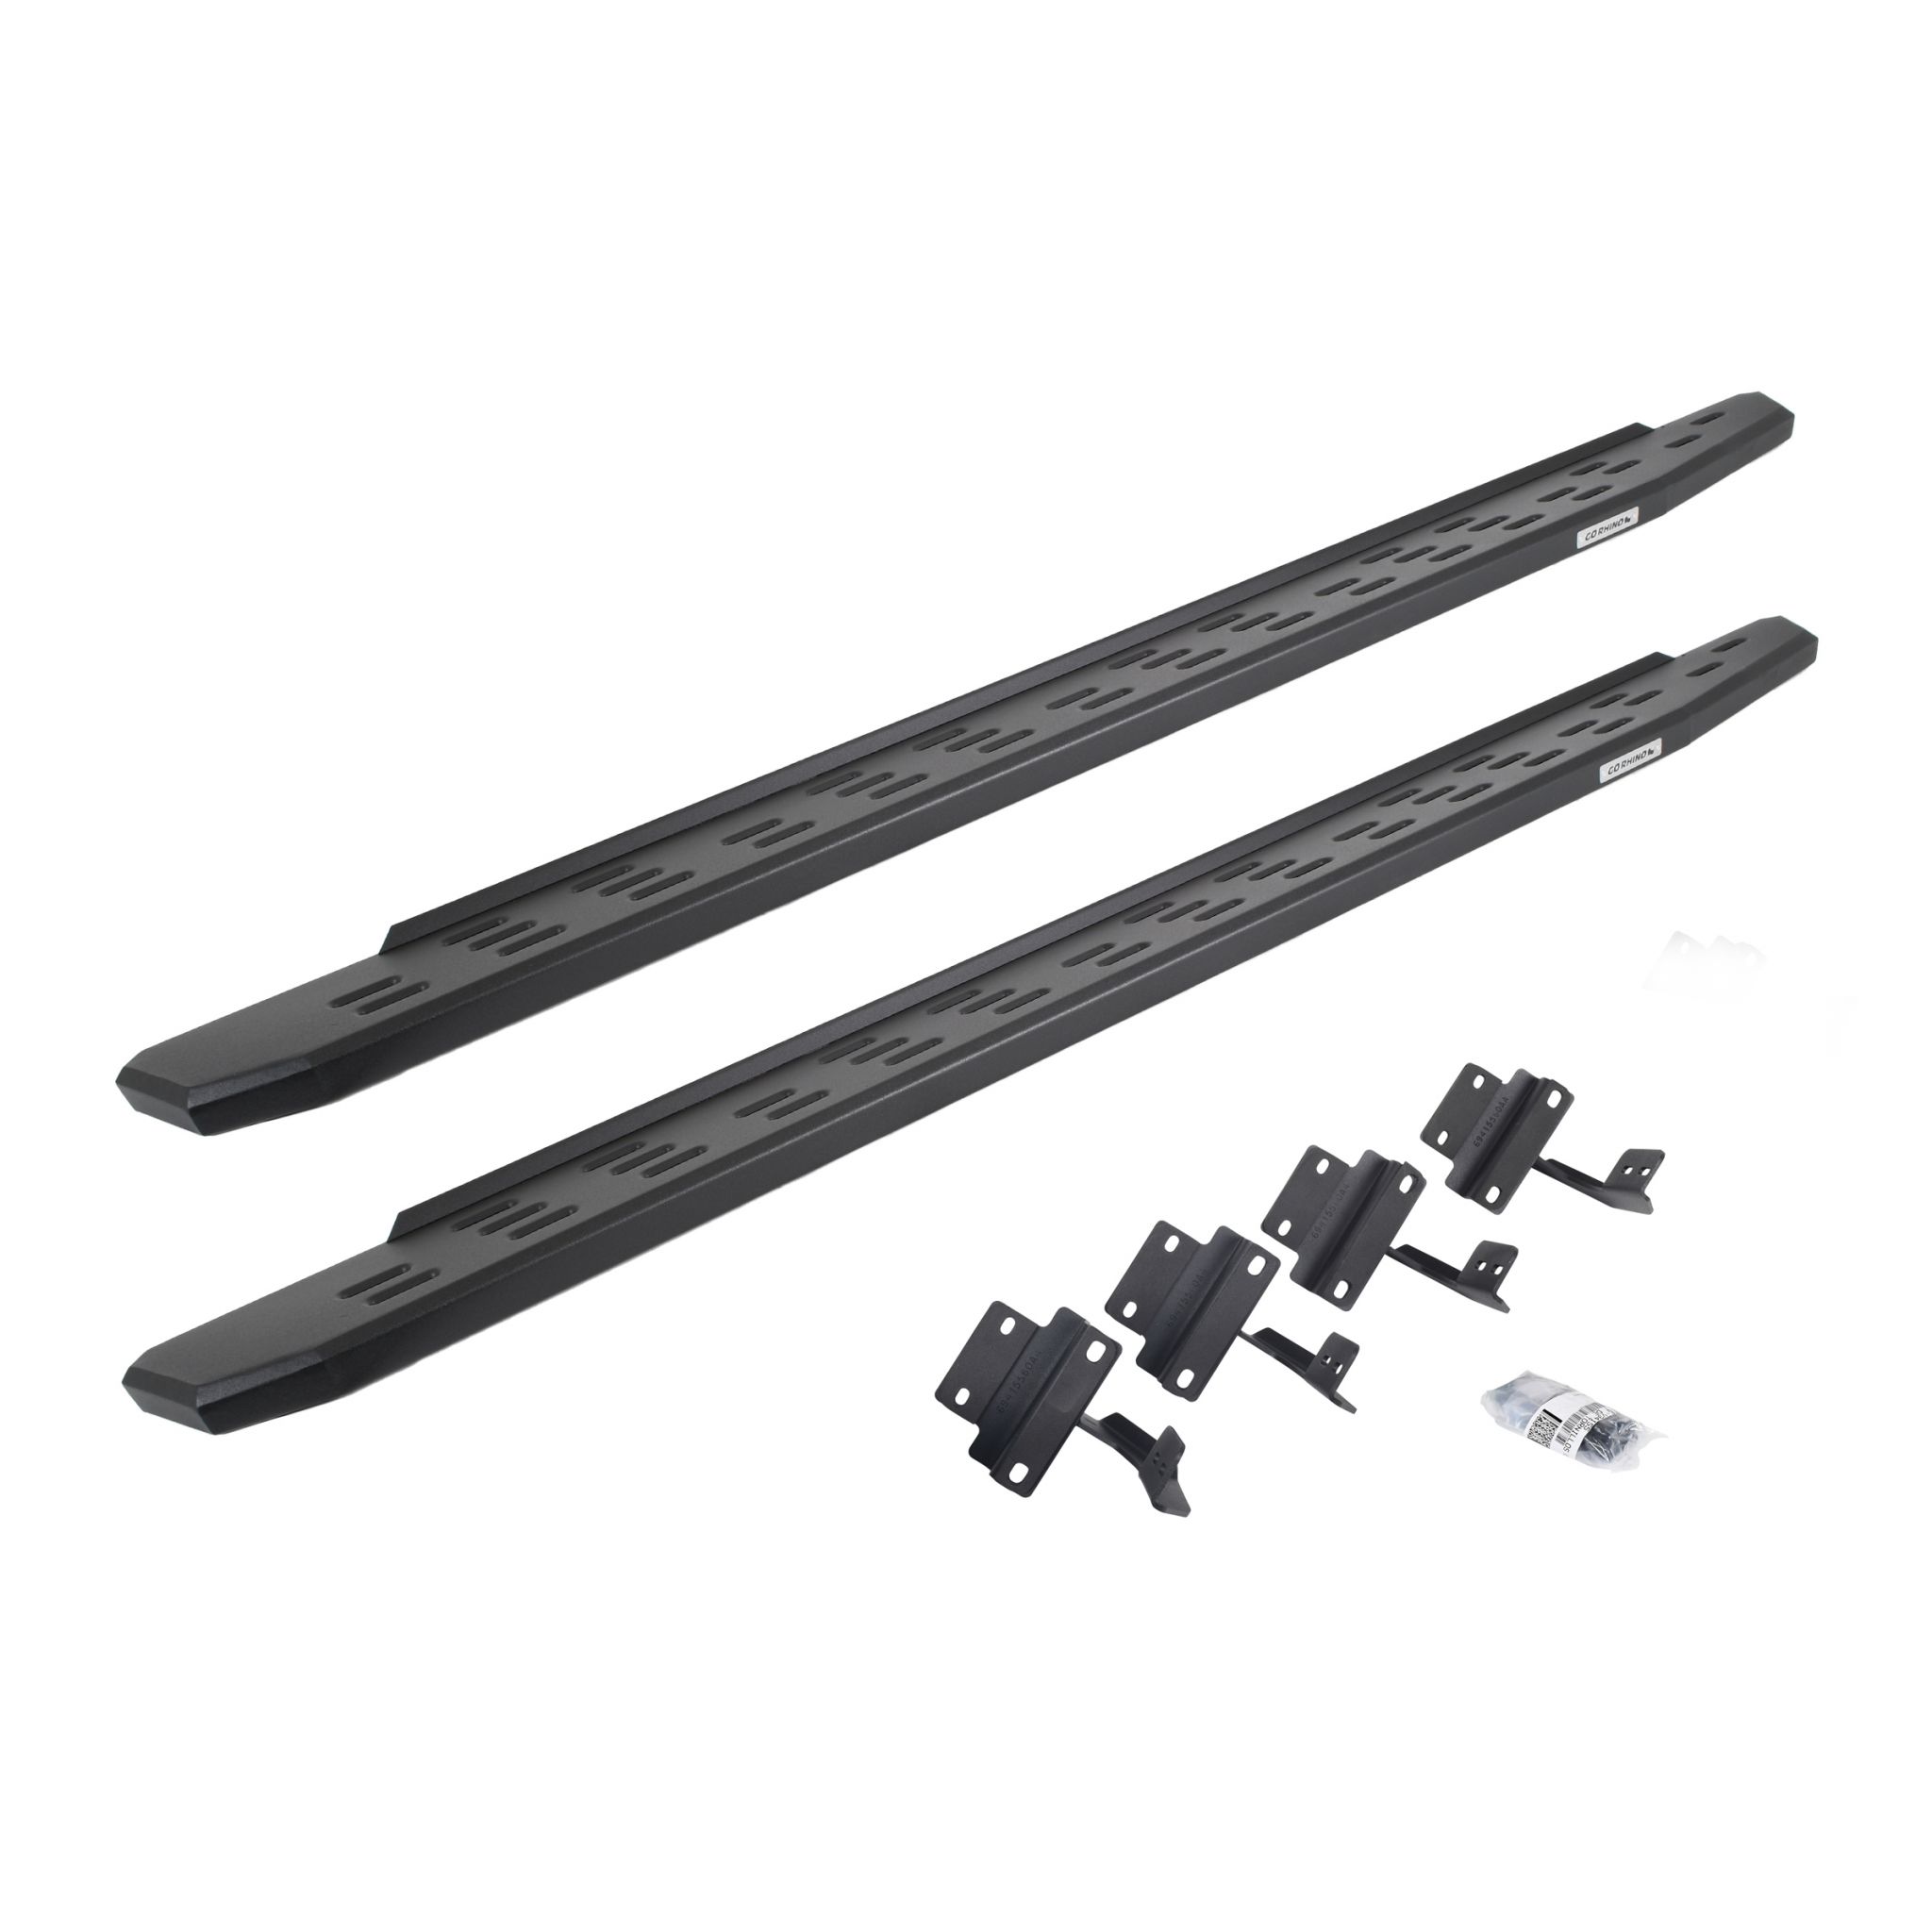 Go Rhino 69617780PC - RB30 Running Boards with Mounting Bracket Kit - Textured Black